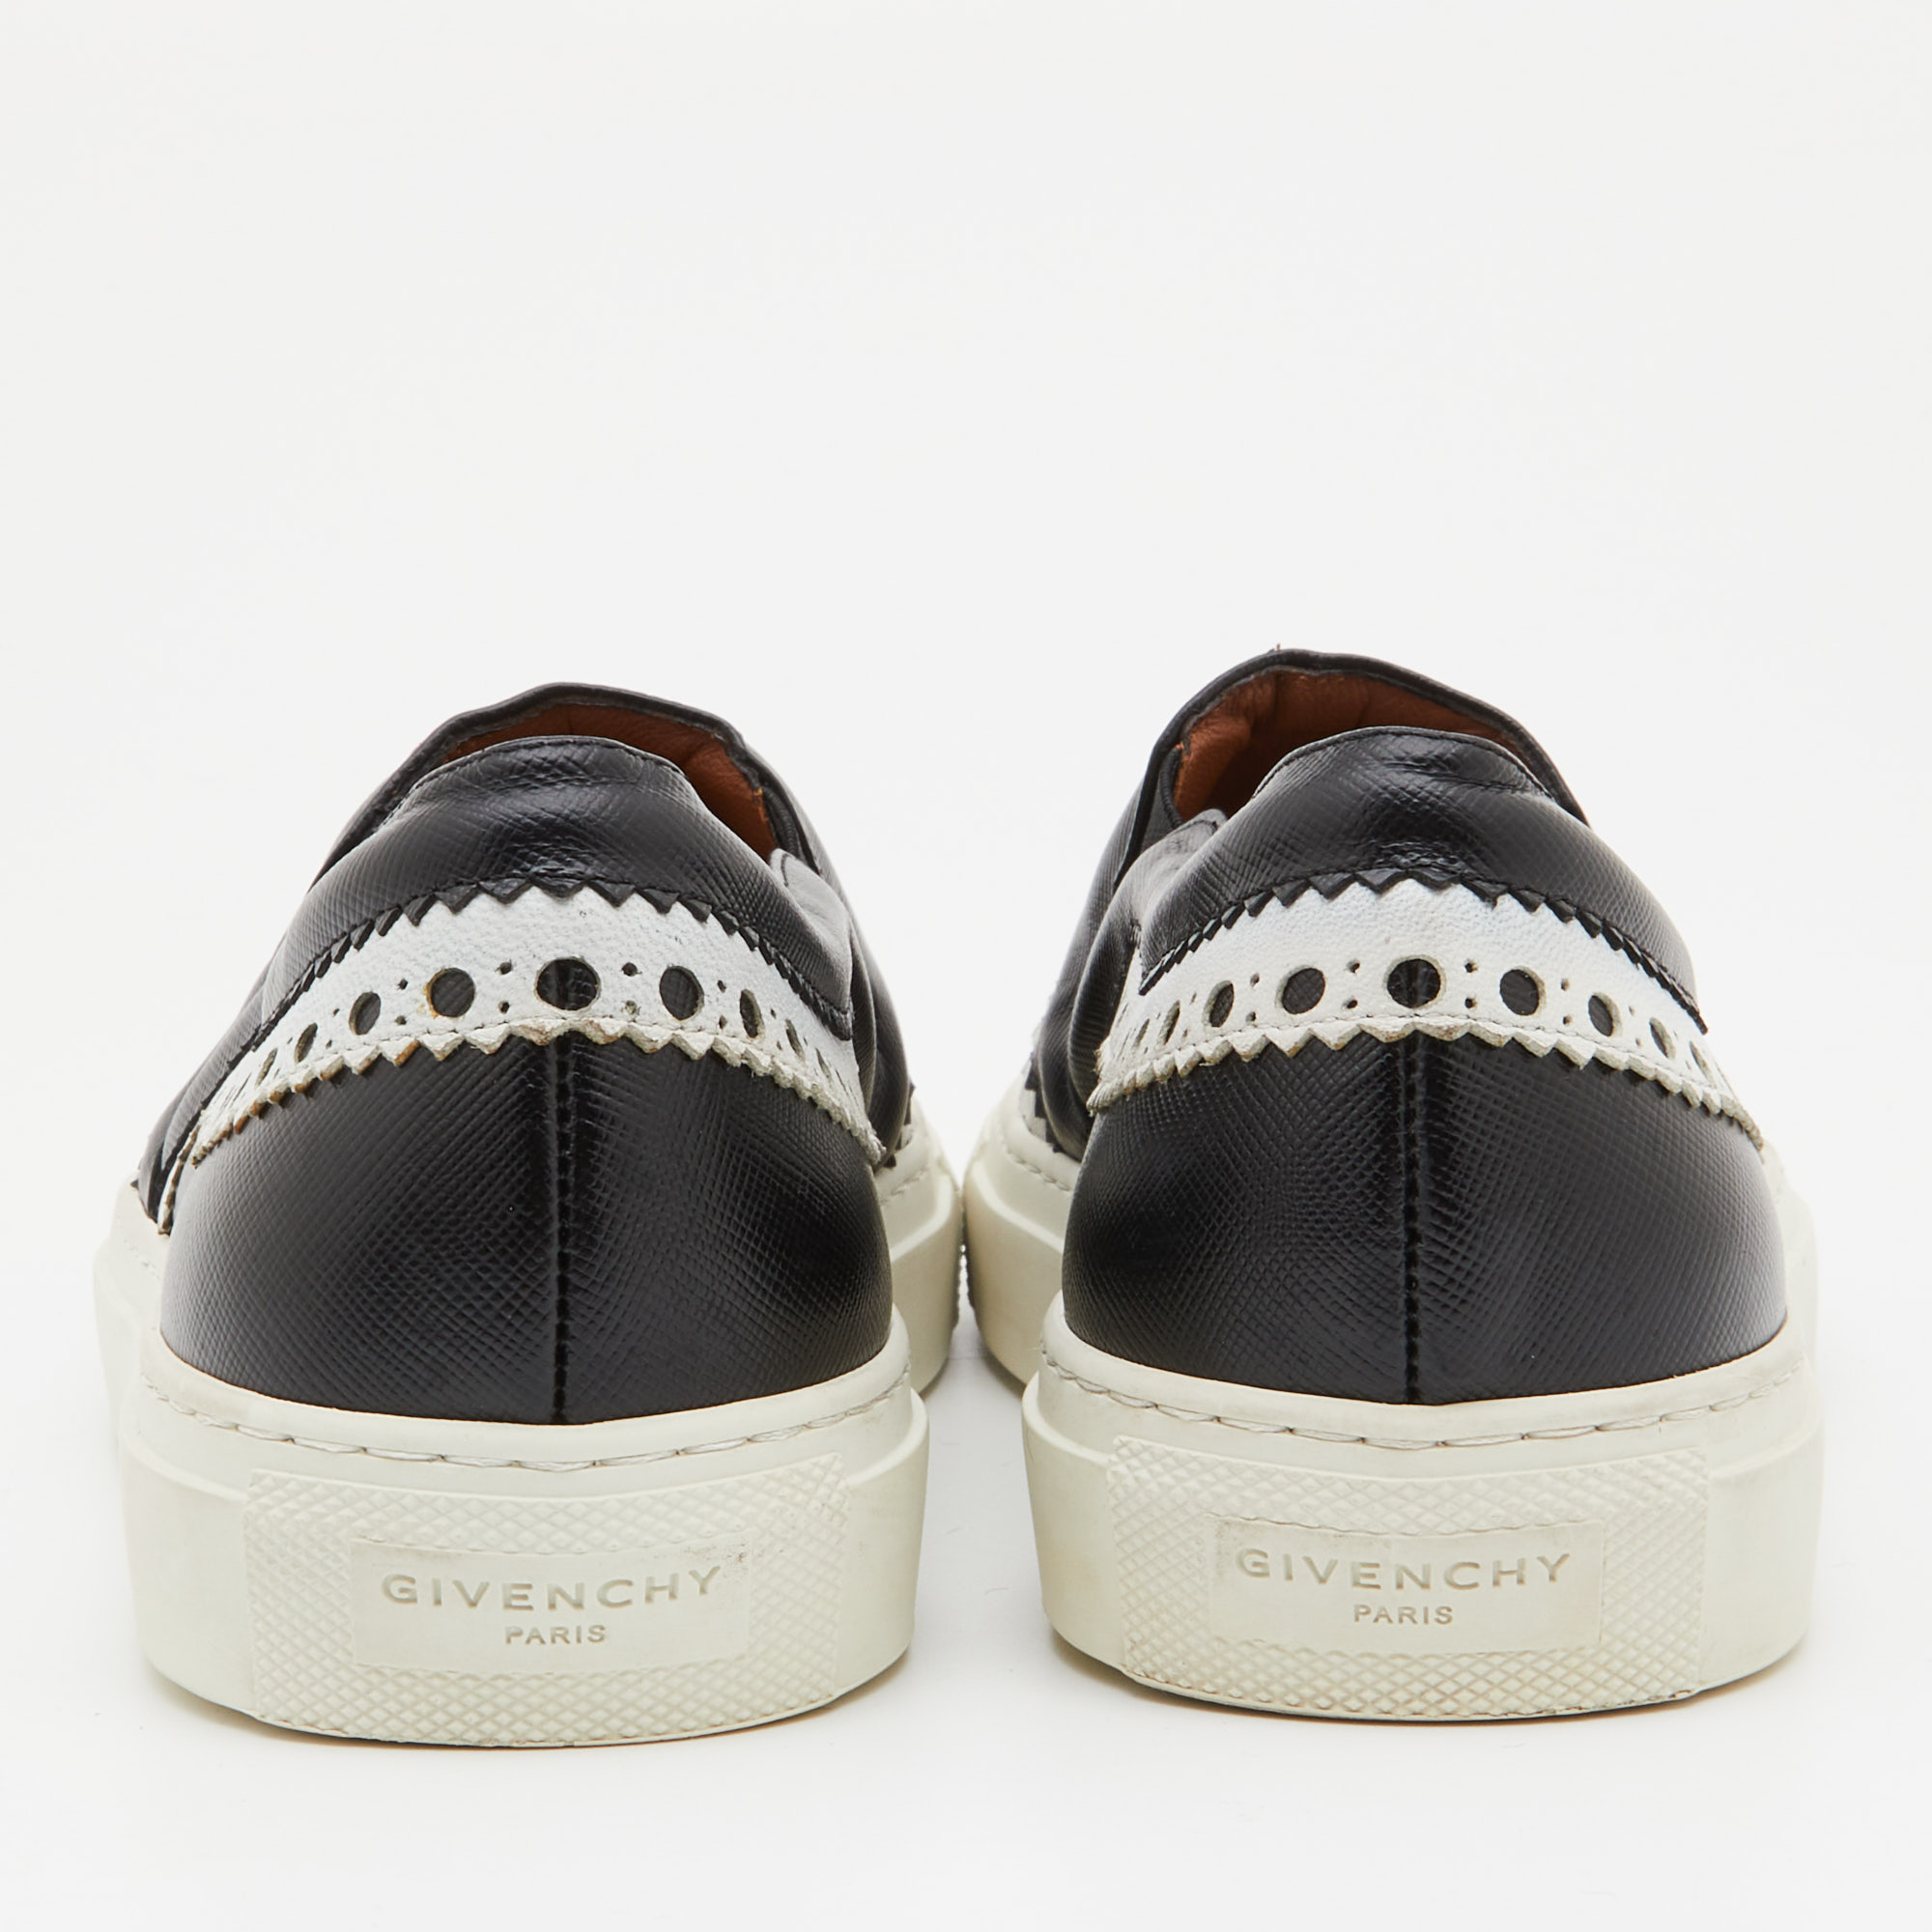 Givenchy Black/White Leather Slip On Sneakers Size 36